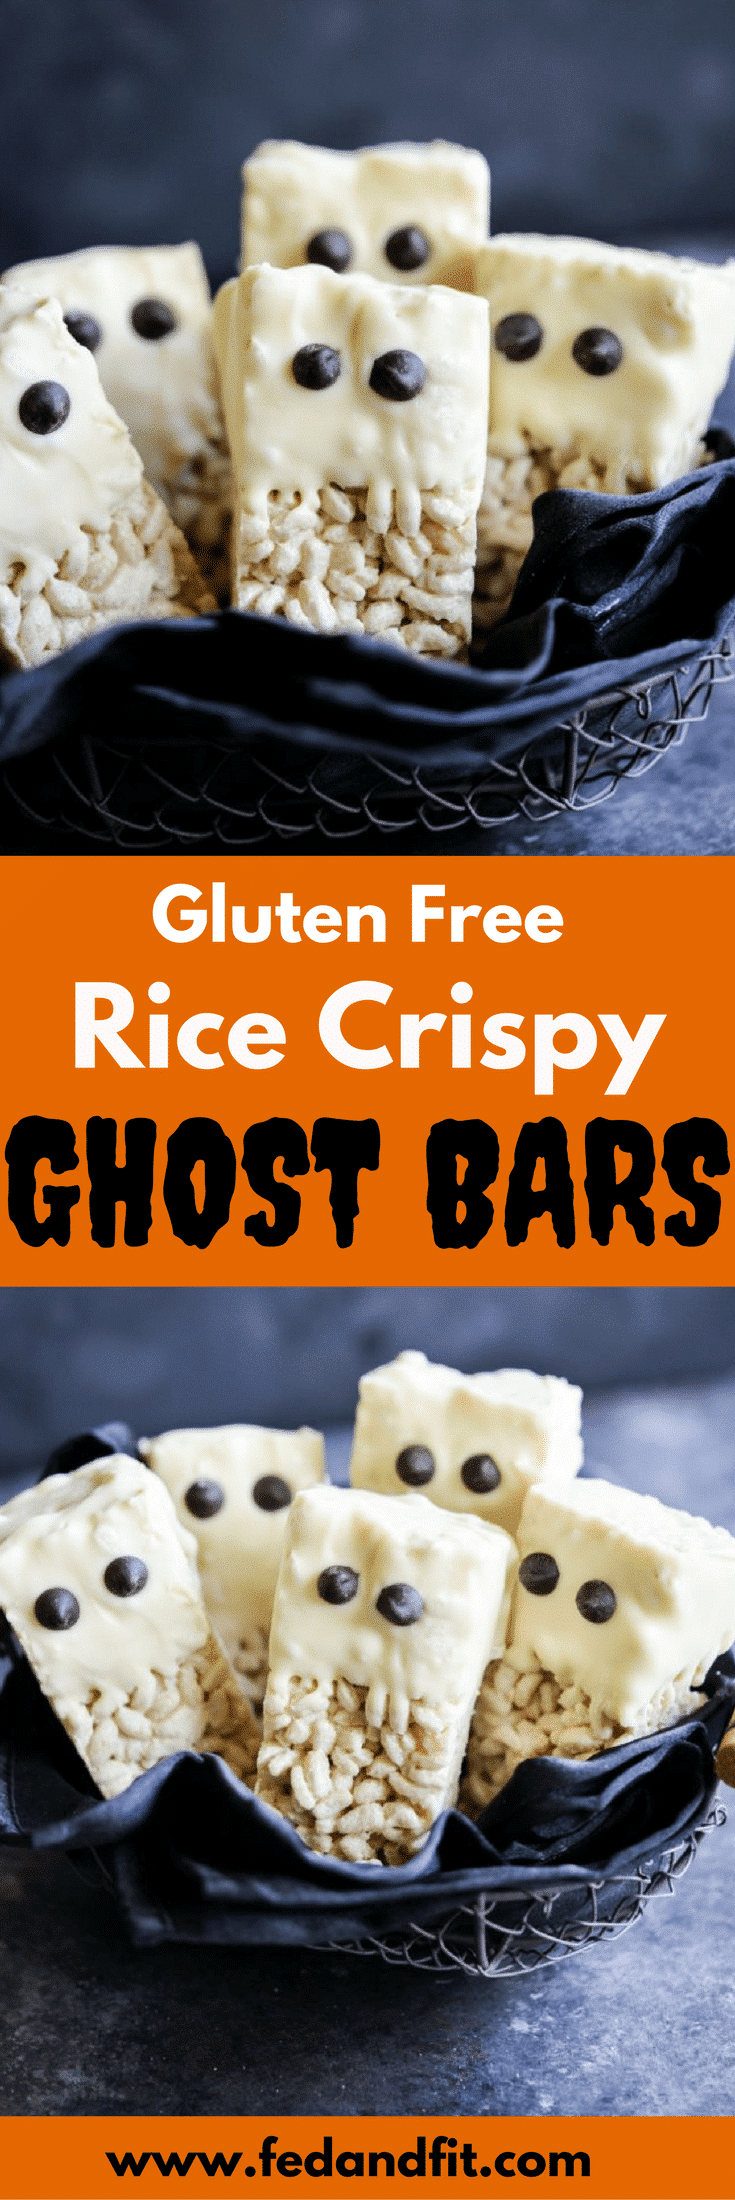 These gluten free rice krispie ghost bars are the perfect cute and festive Halloween dessert that are easy to make and guaranteed to be a hit at your Halloween party or as a surprise spooky treat in your kid's lunchbox!